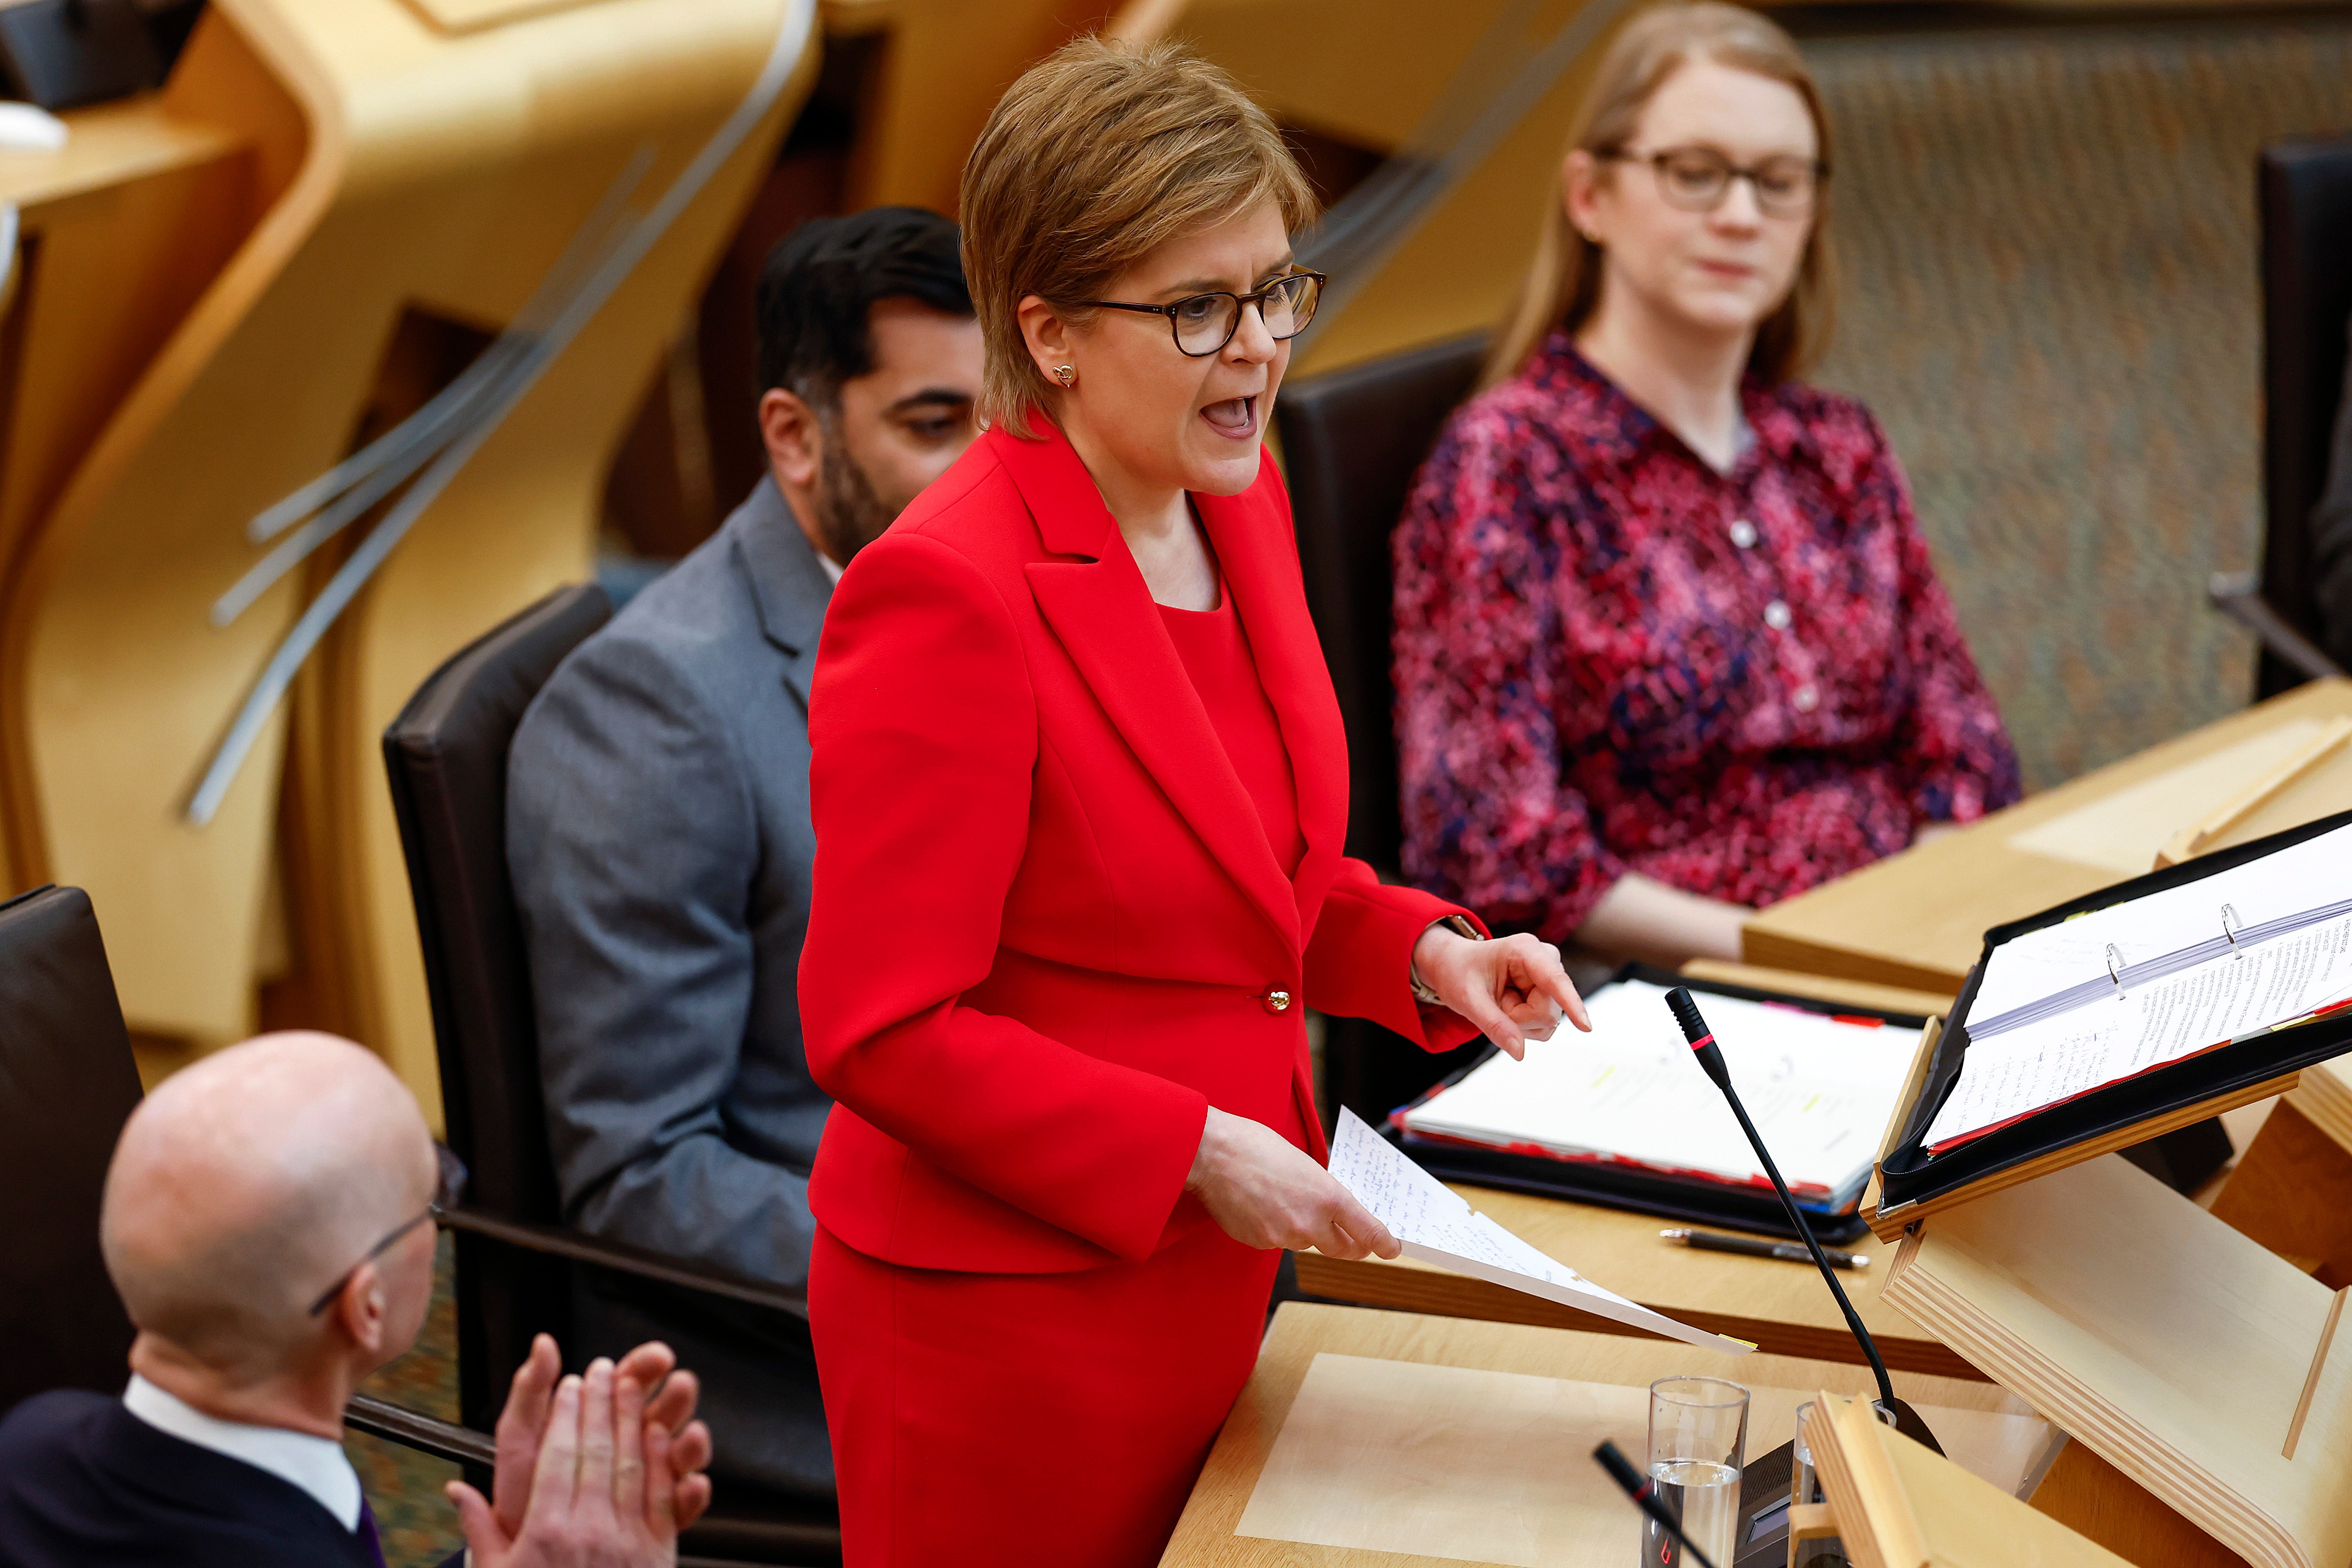 Sturgeon misjudged her route to a place in history